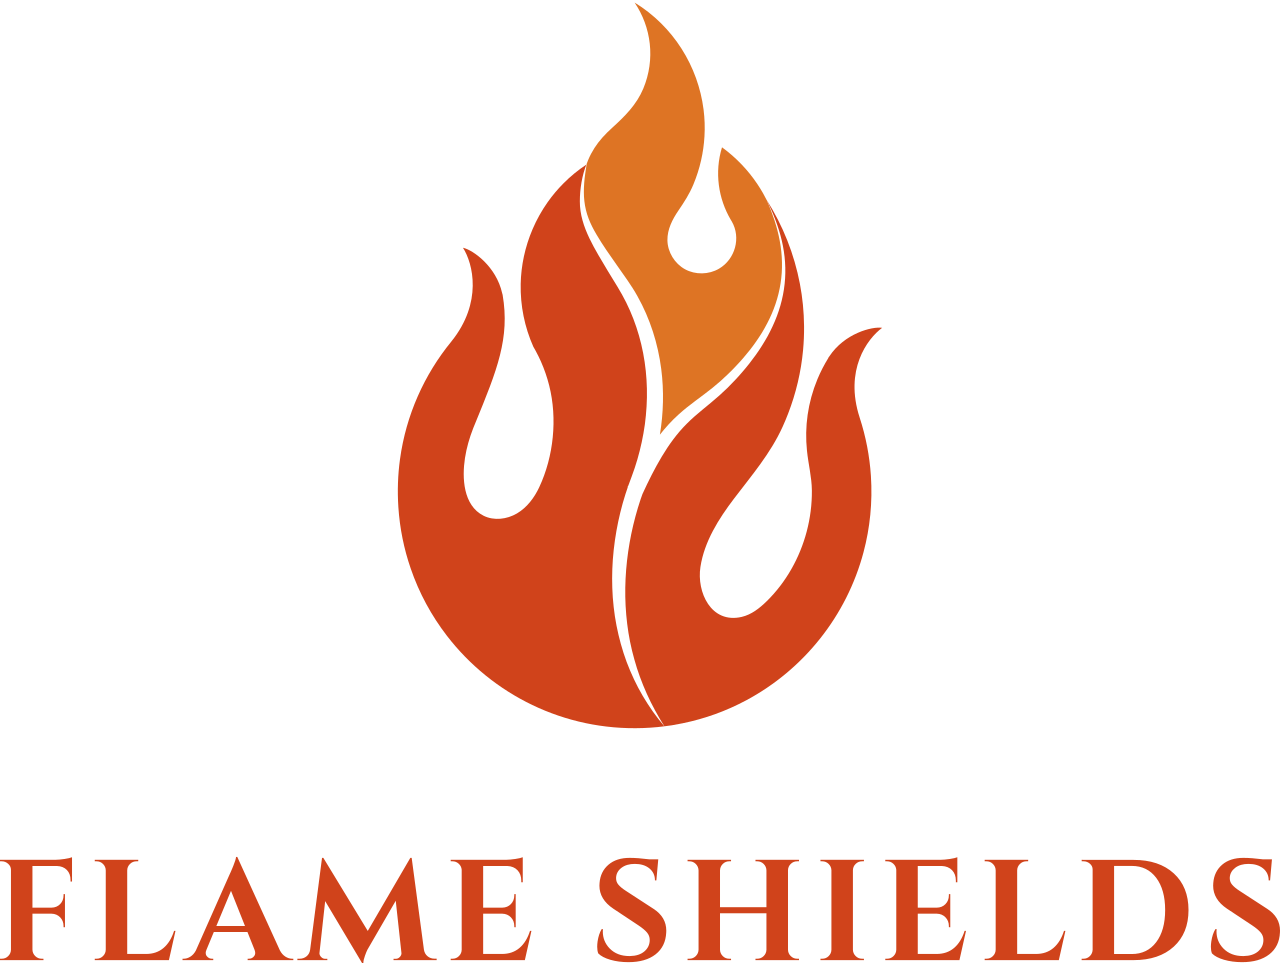 Flame Shields's web page